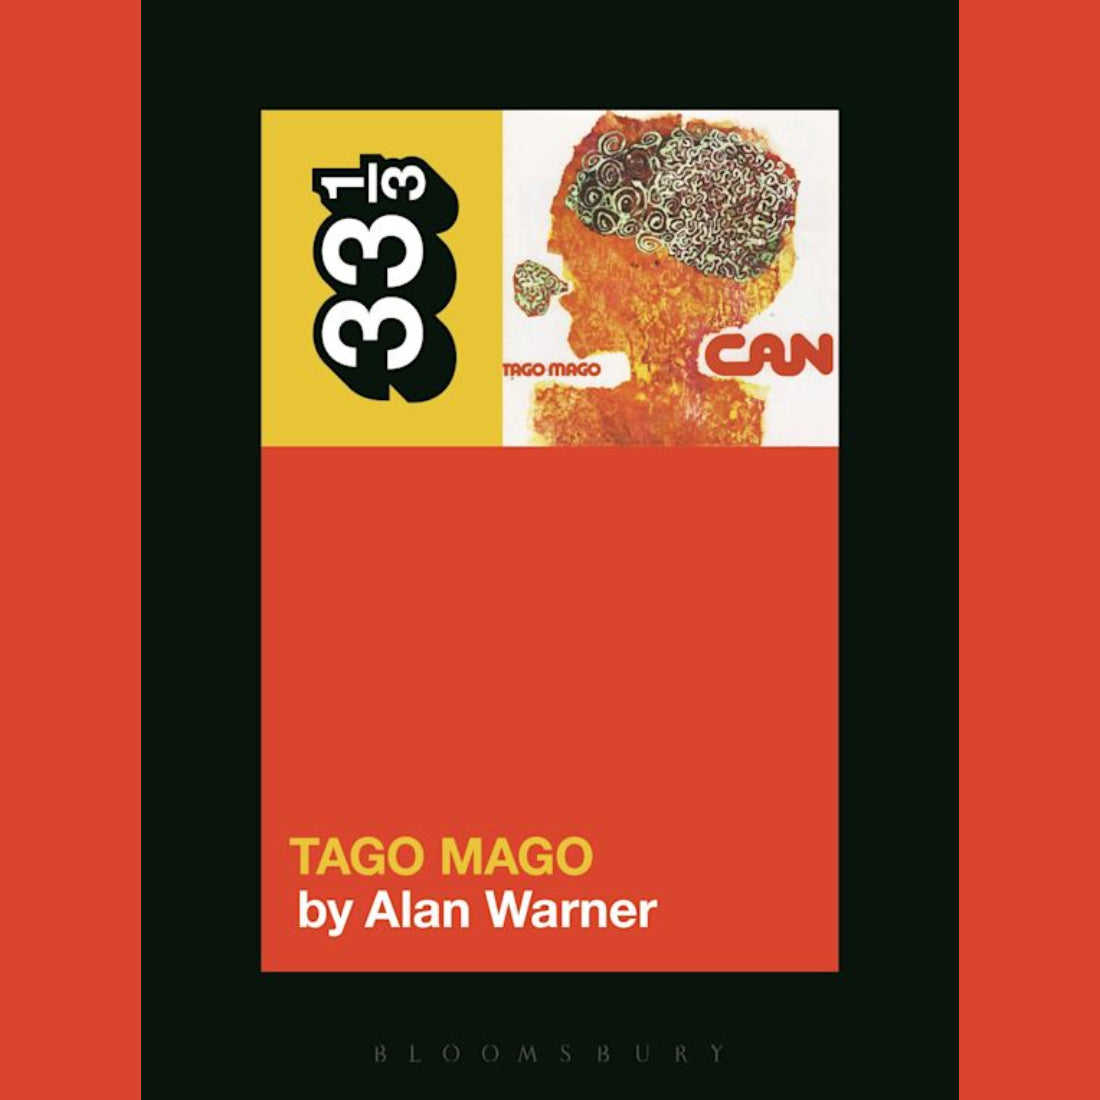 Alan Warner - Can's Tago Mago | Buy the book from Flying Nun Records